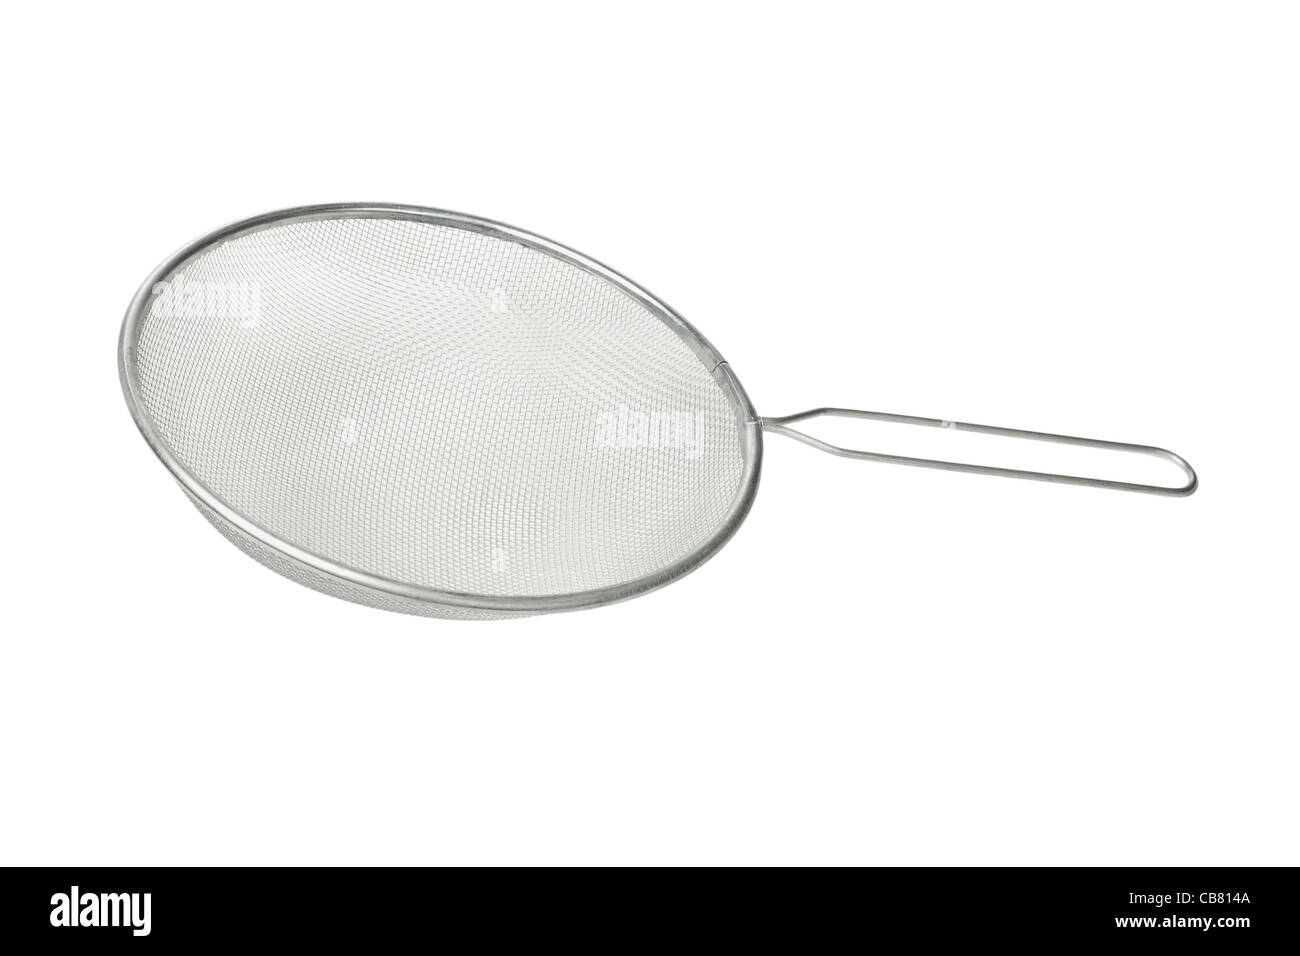 Stainless steel colander isolated on white background Stock Photo